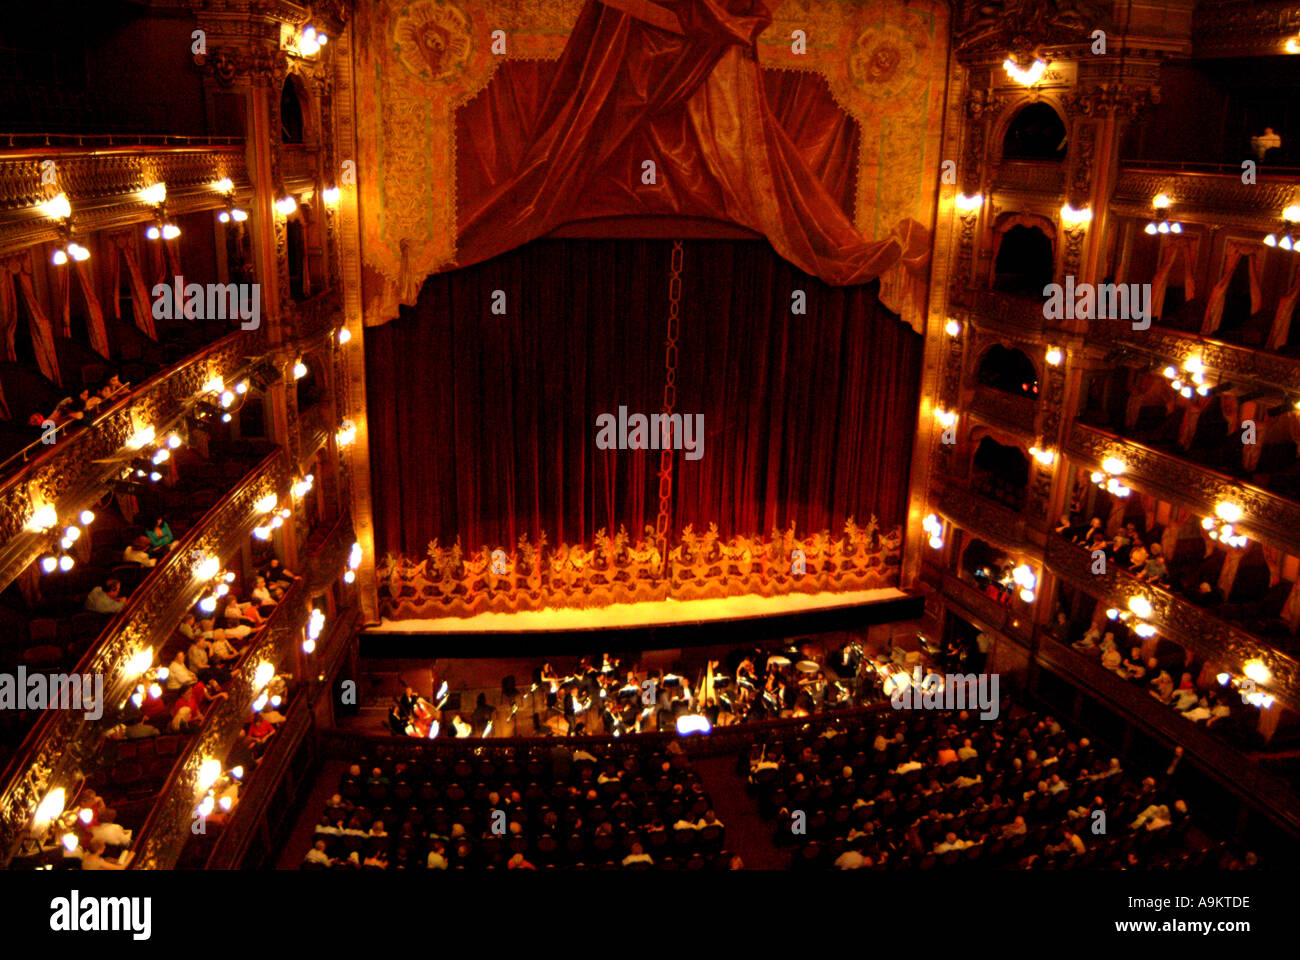 Argentina Buenos Aires Teatro Colon audience at a performance  Stock Photo